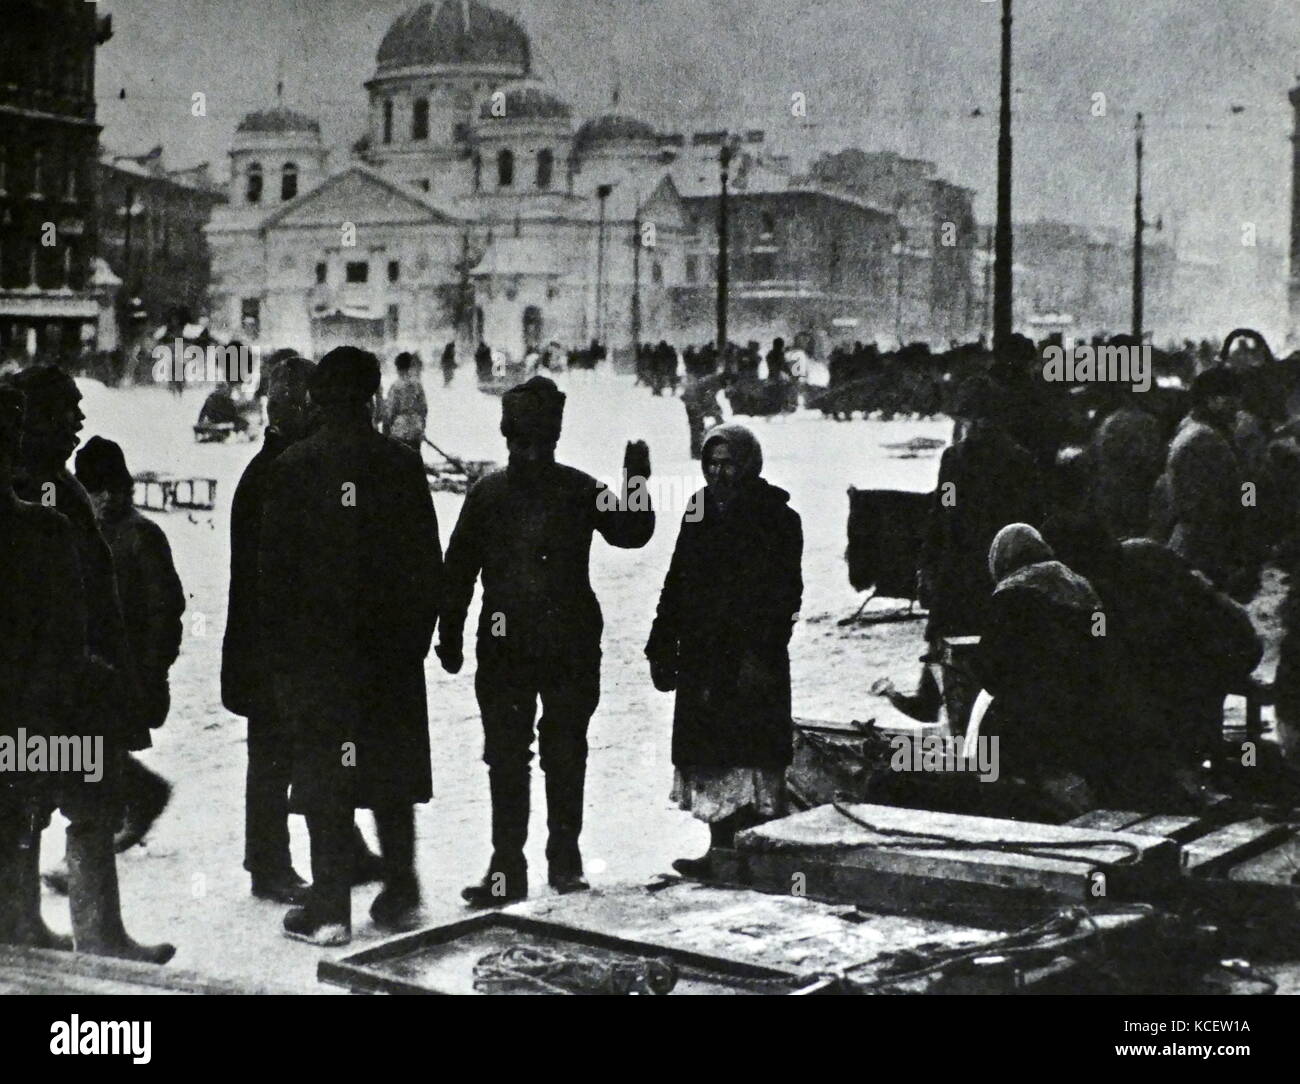 Petrograd Residents (St Petersburg) gather tto take food supplies during food shortages in the weeks before the Russian Revolution. 1917 Stock Photo